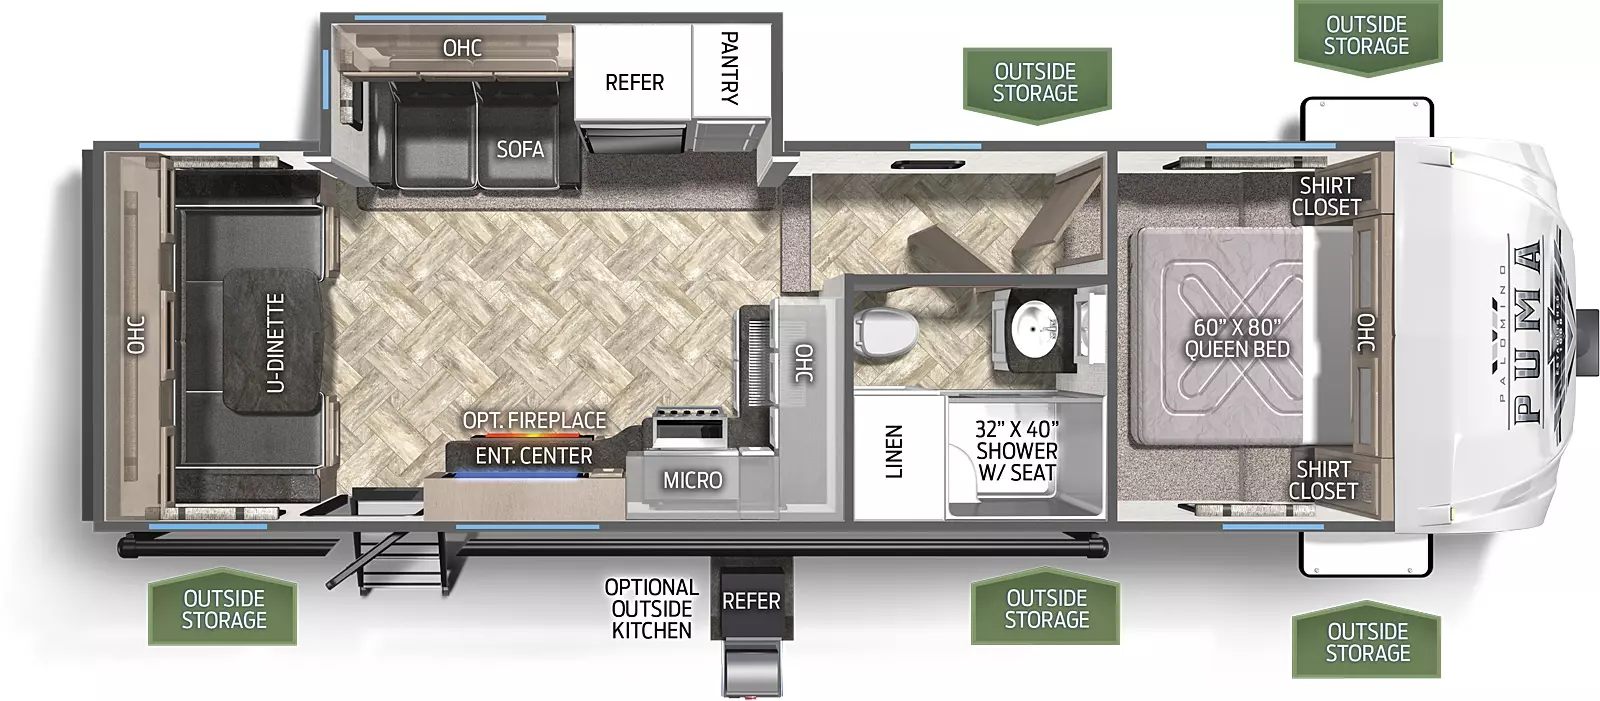 The 265RDS has one slide out on the off door side. Exterior features include a 17 foot awning and a micro outside kitchen. Interior layout from the front to the back: front bedroom with queen bed; full bathroom; steps into living and kitchen area; slide out containing pantry, refrigerator and three cushion sofa; corner kitchen with microwave, cooktop stove and entertainment center; rear U-dinette.